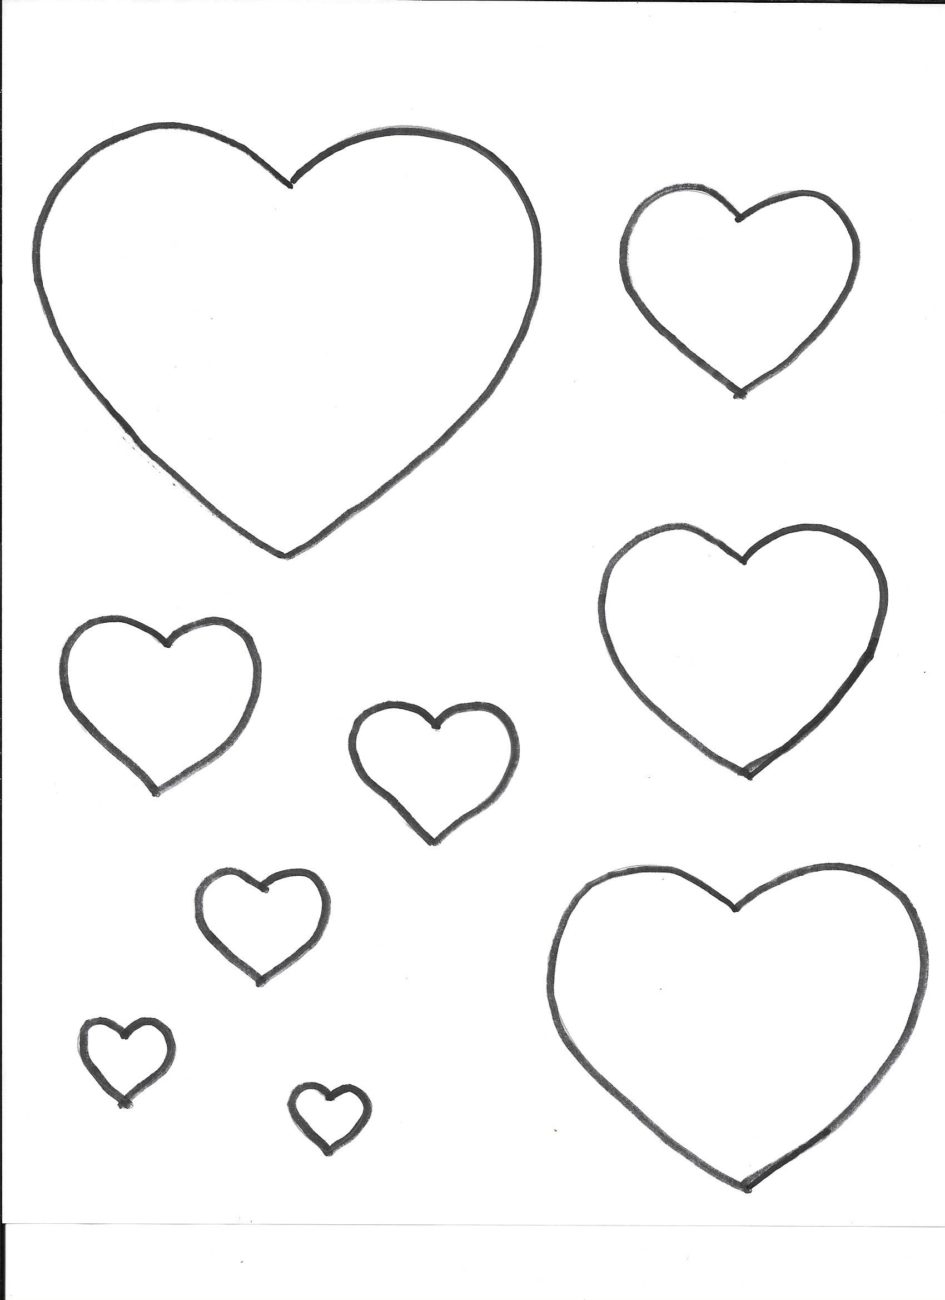 Download Heart Template 1 - Free Printable | No, YOU Need To Calm Down!